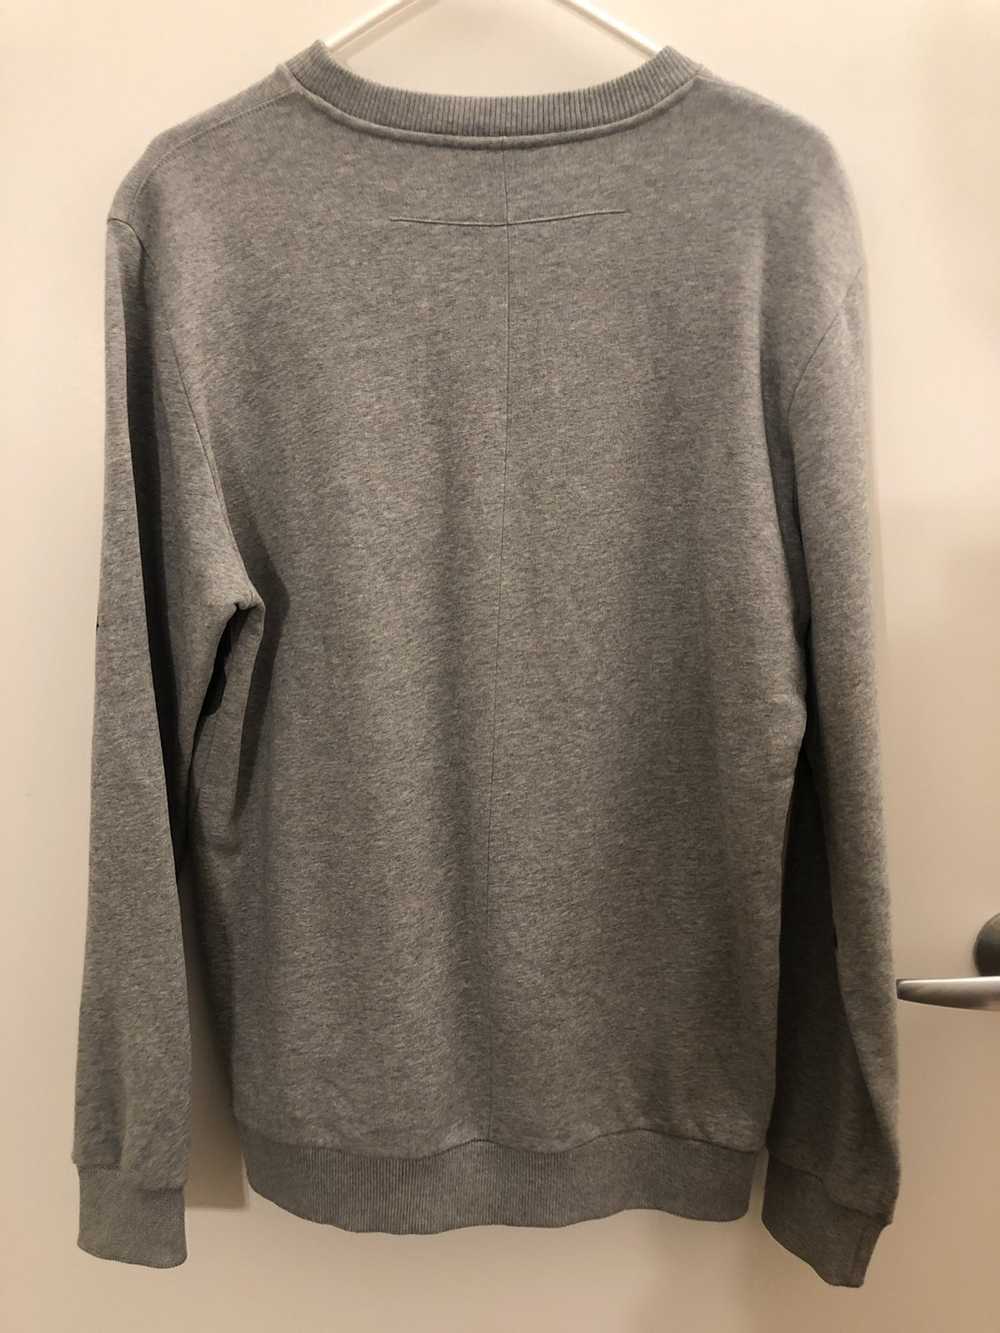 Givenchy Givenchy Rottweiller Sweater xs grey - image 2